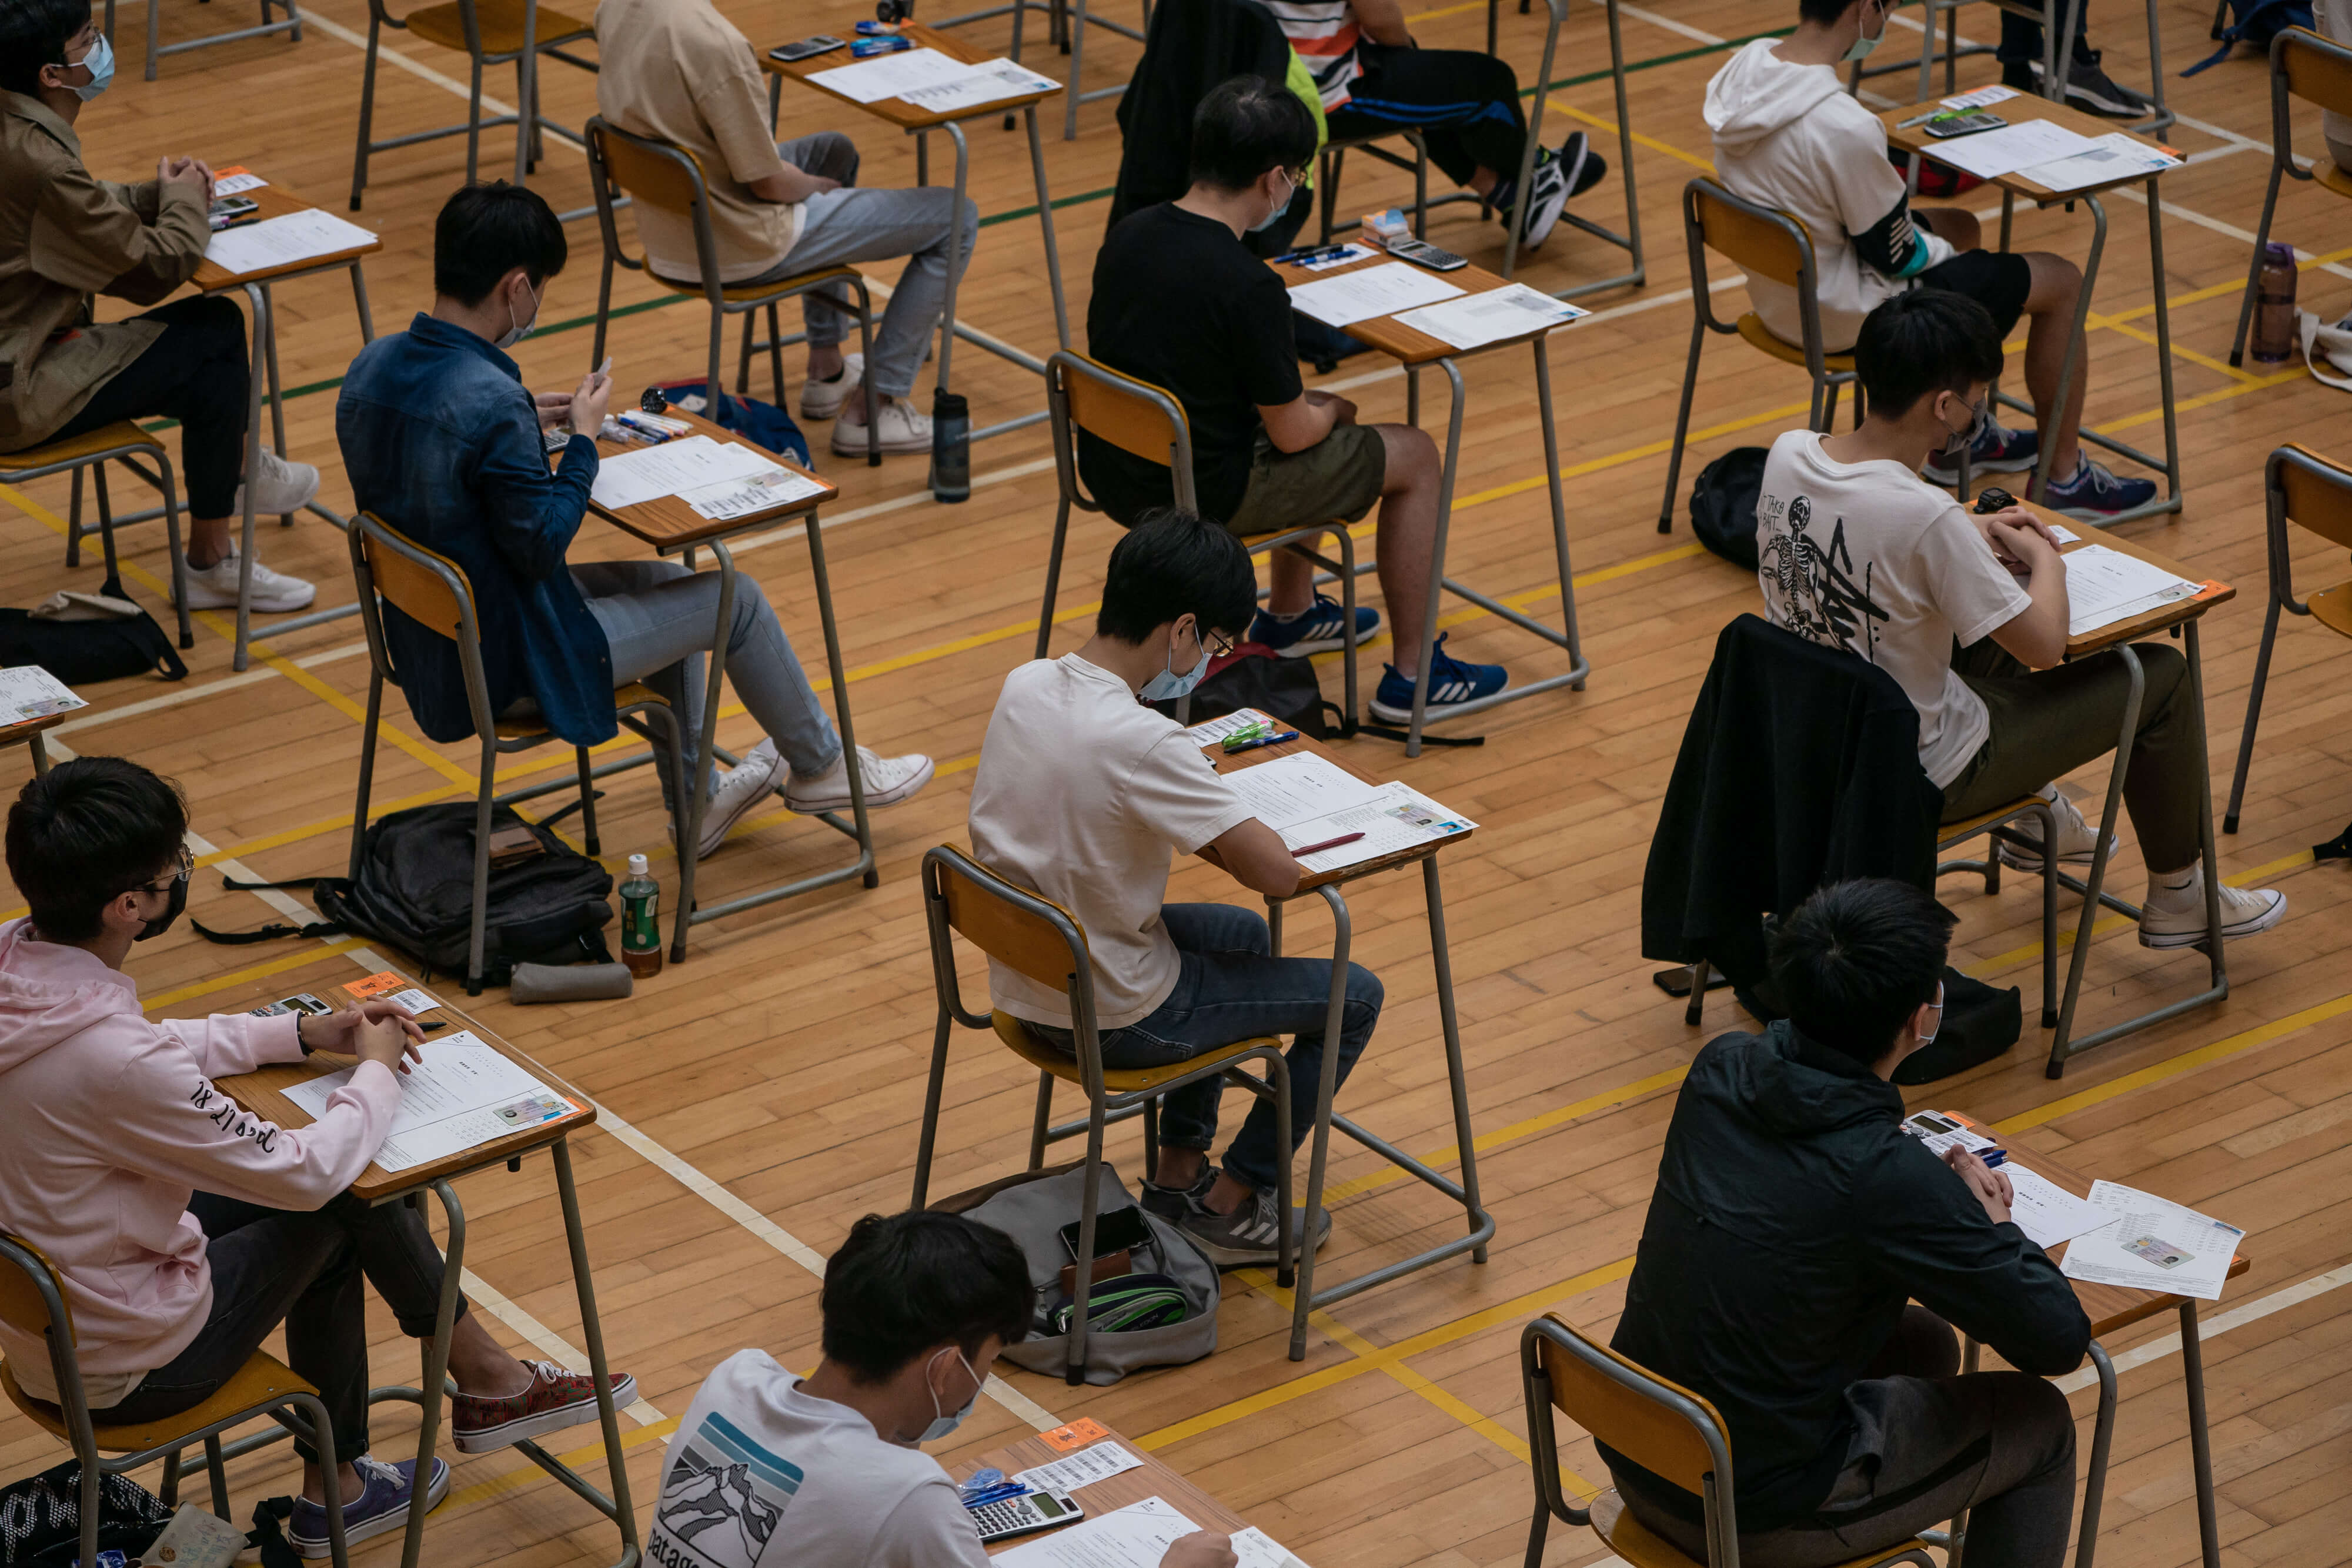 Should traditional end-of-school exams be abolished?